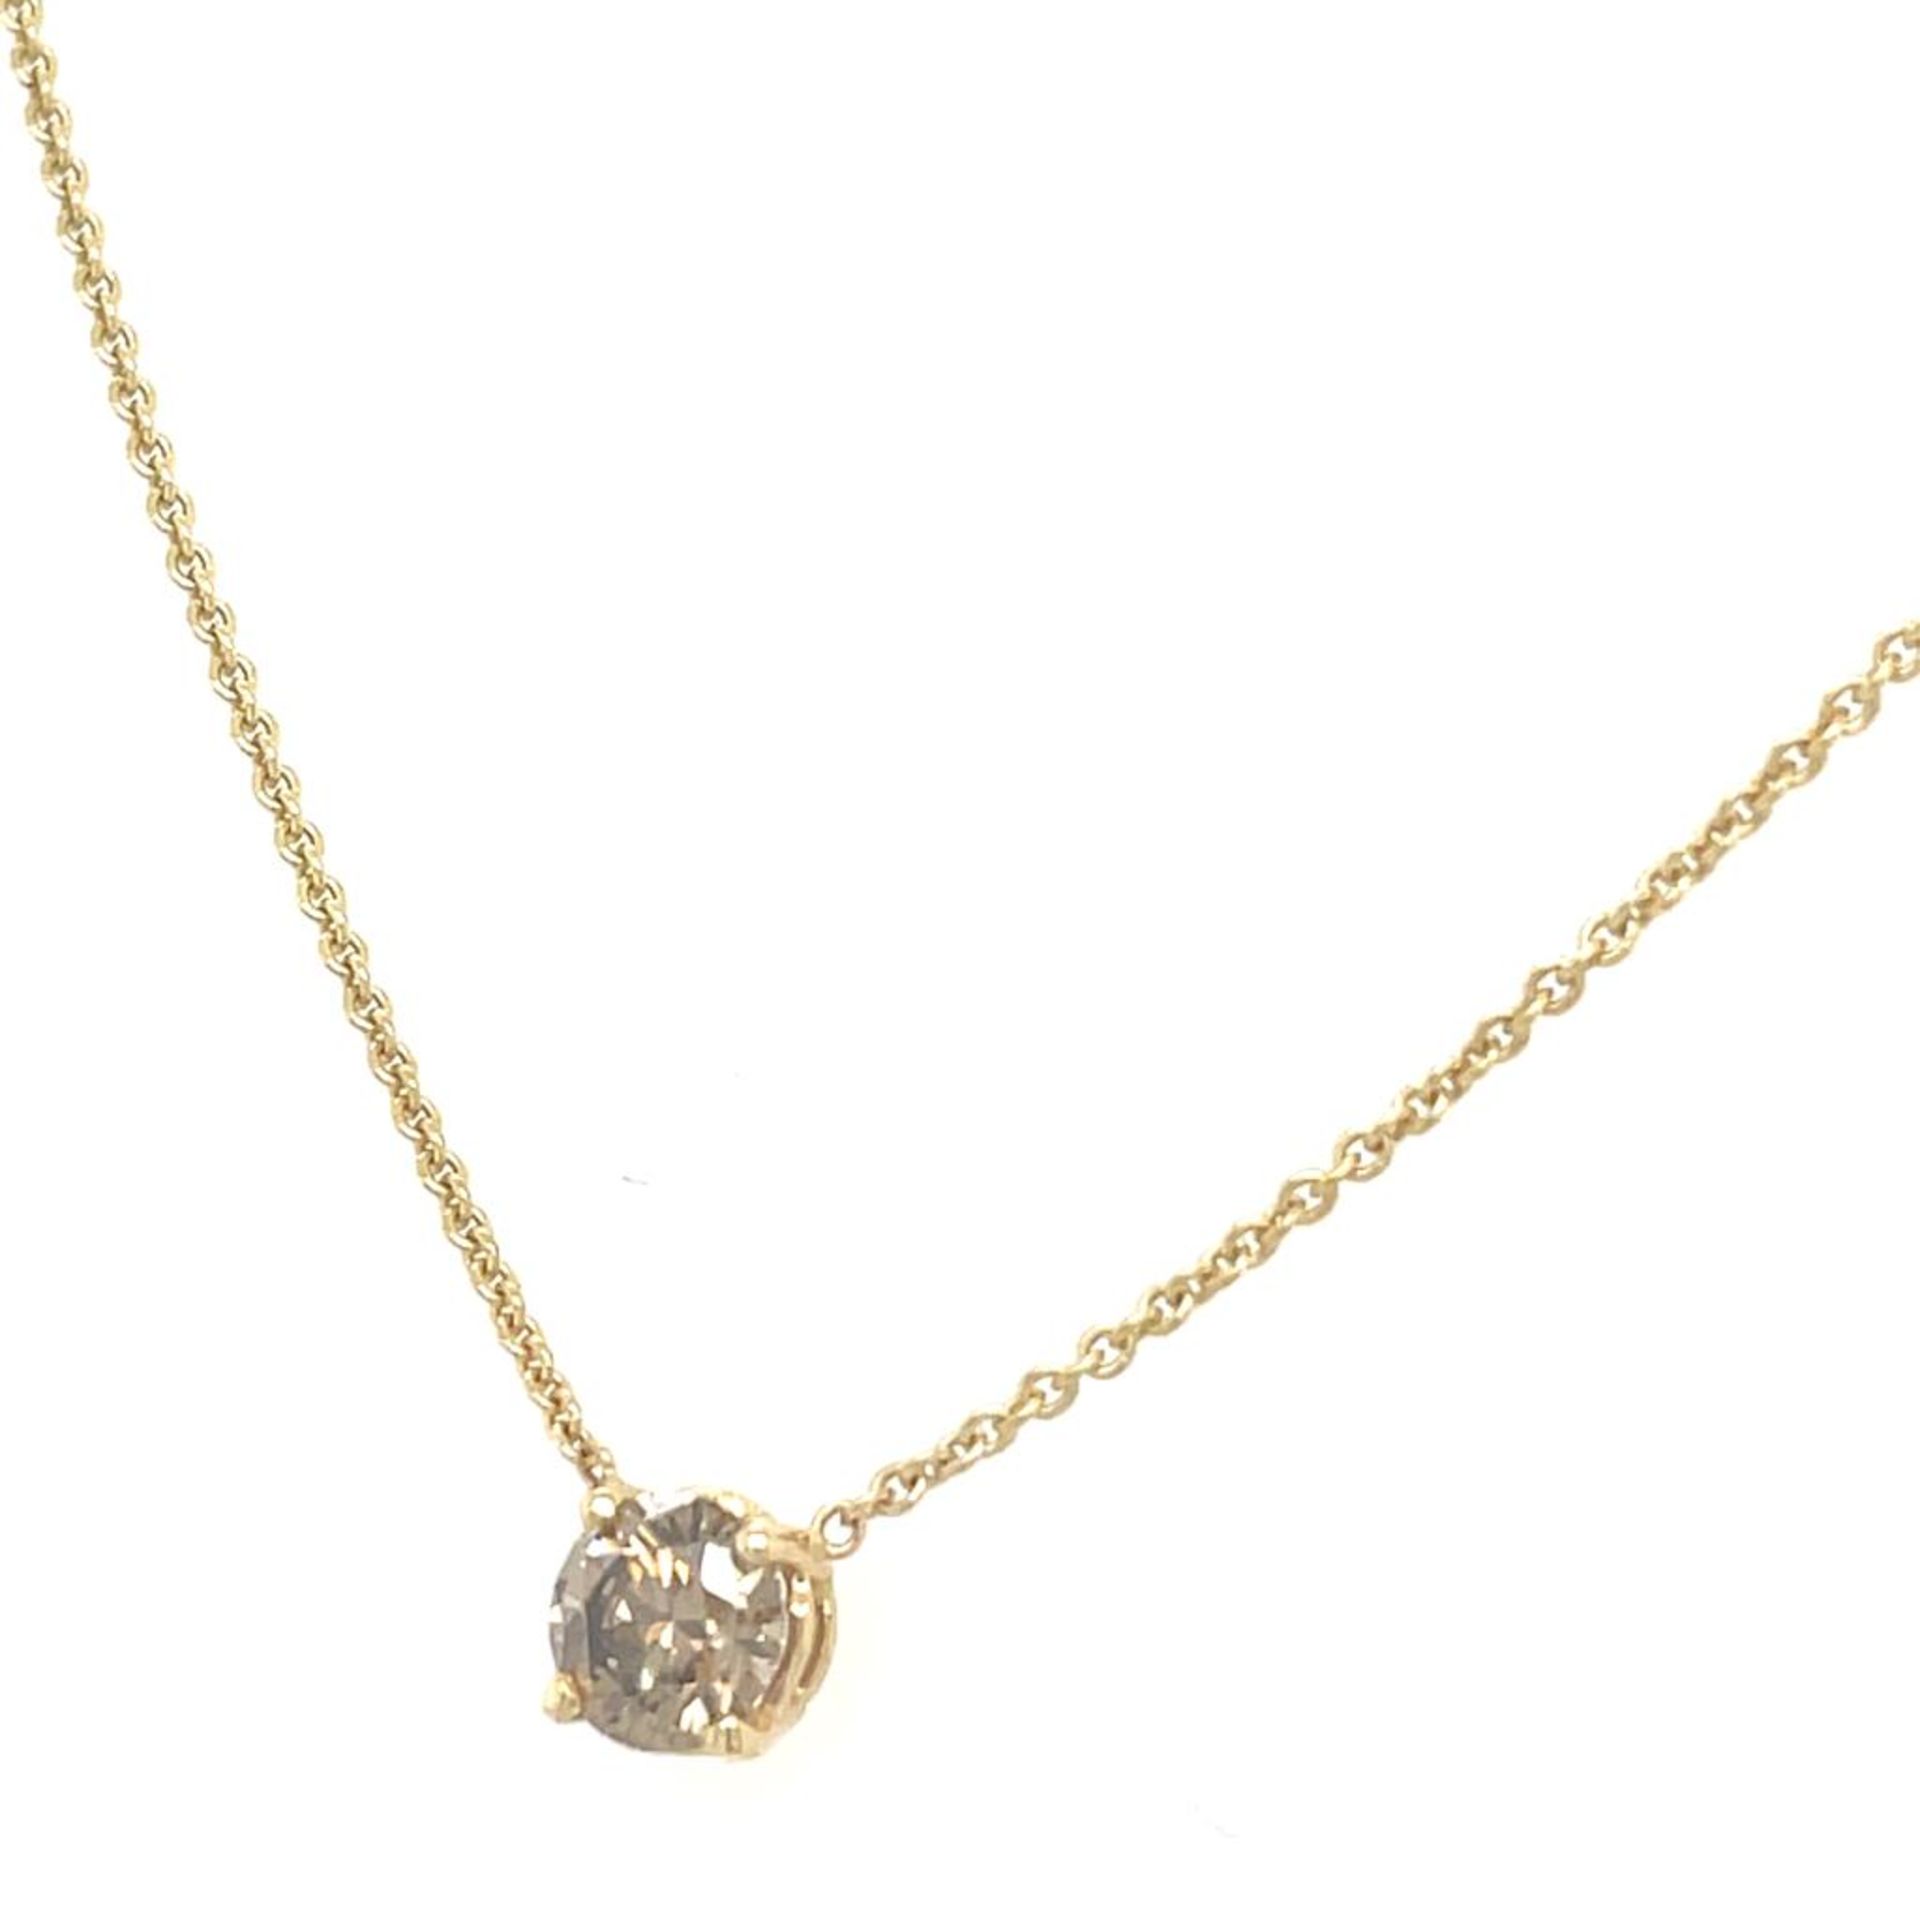 14K YELLOW GOLD 1.97G DIAMOND NECKLACE 0.56 CT NATURAL FANCY DEEP BROWN/VS1 CERTIFICATION AIG - - Image 2 of 4